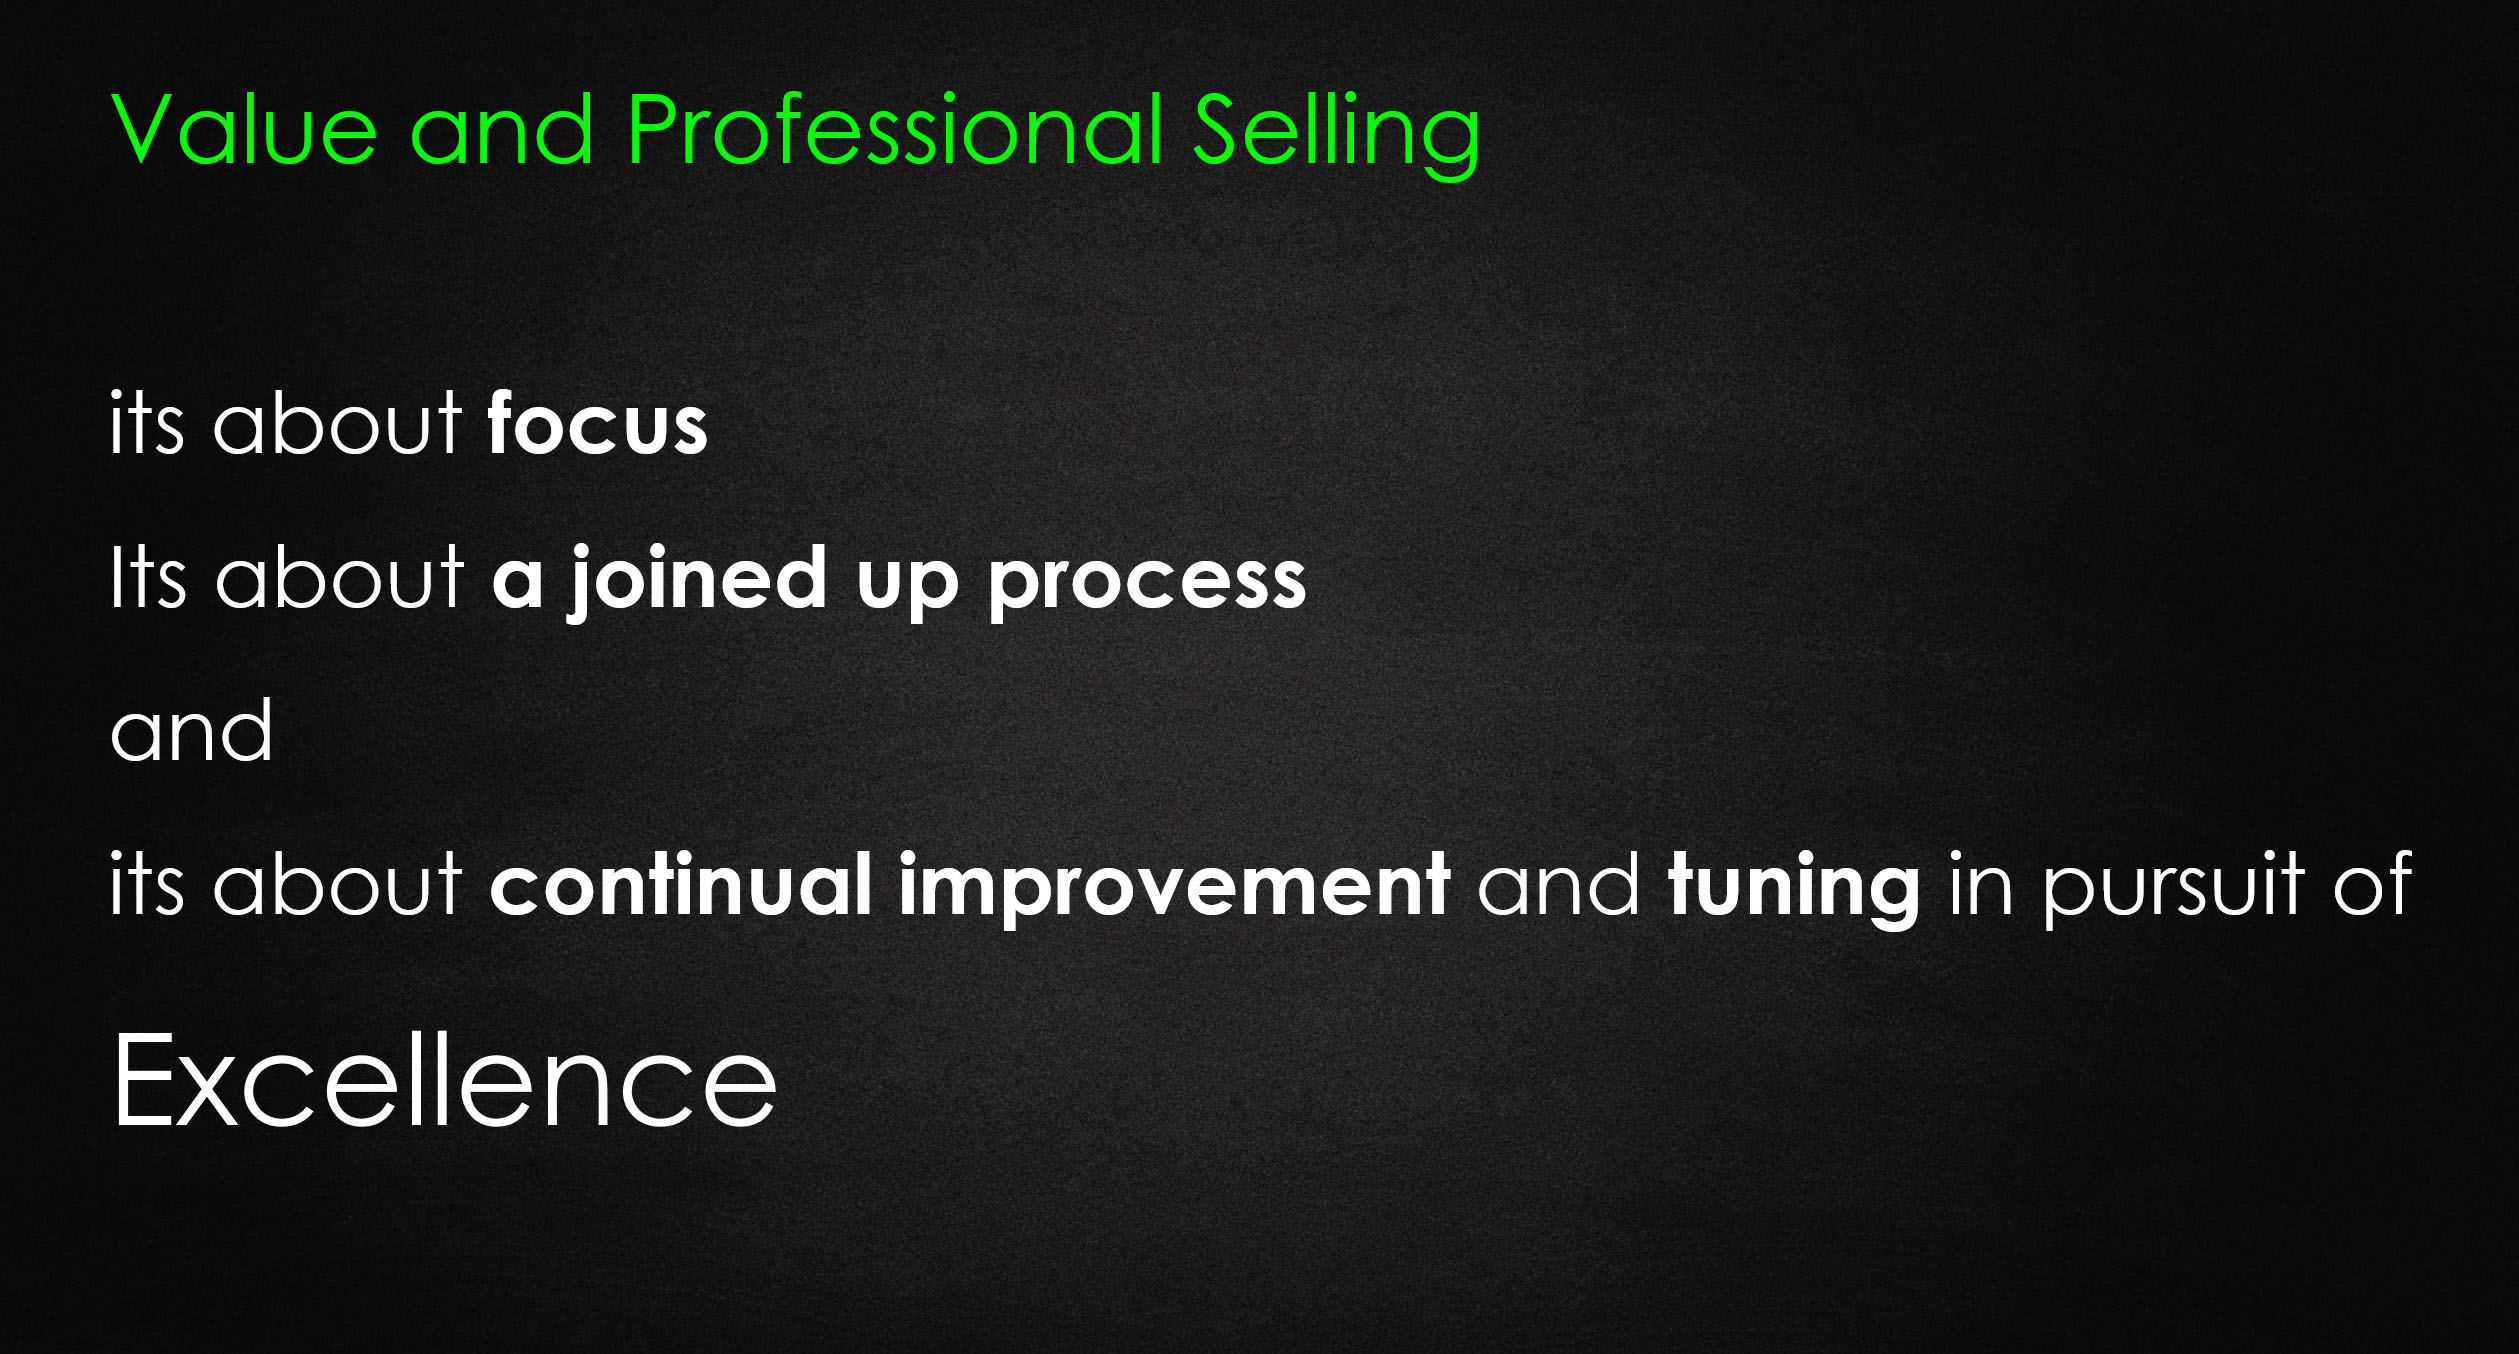 Professional selling is a highly tuned process